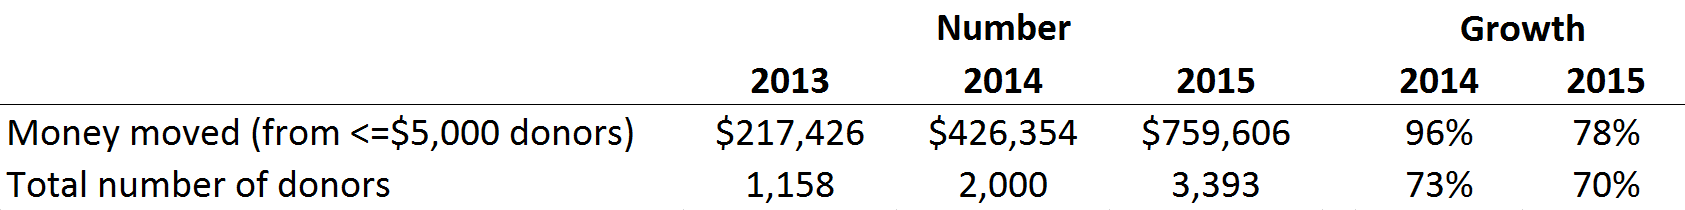 Table_2015Q1MoneyMoved.png